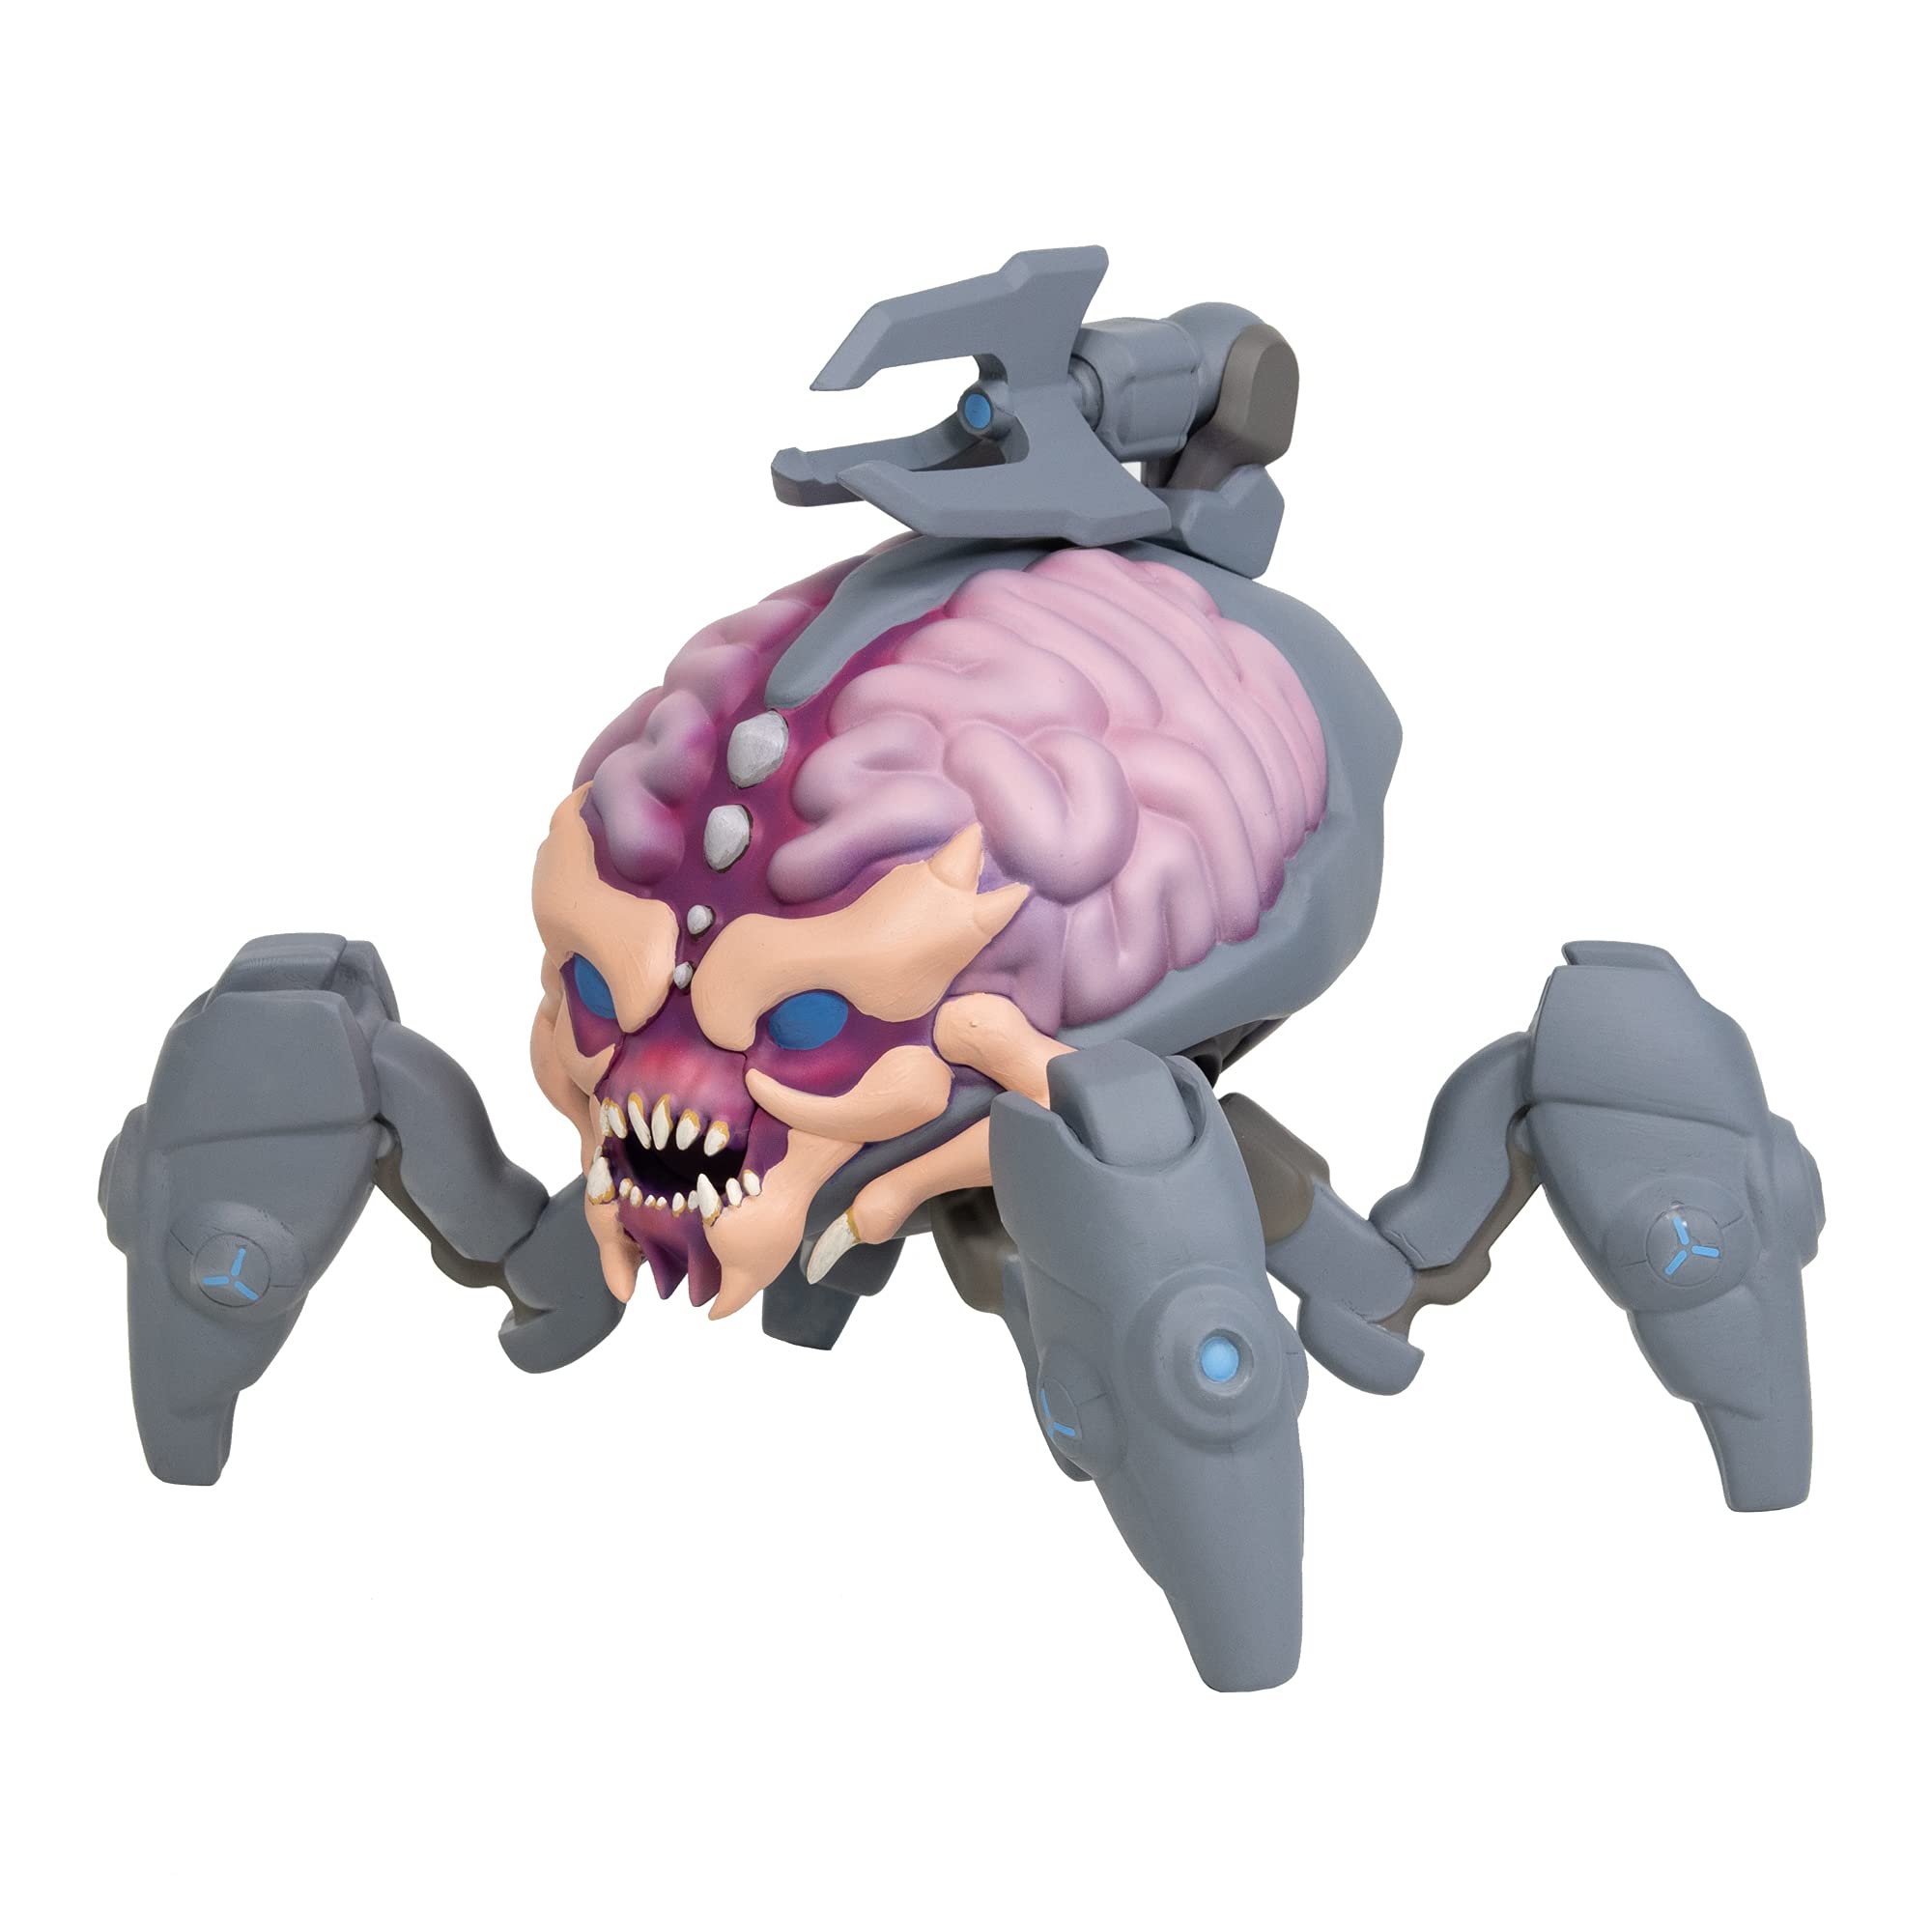 Numskull Arachnotron Doom Eternal in-Game Collectible Replica Posable Toy Figure - Official Doom Merchandise - Limited Editio